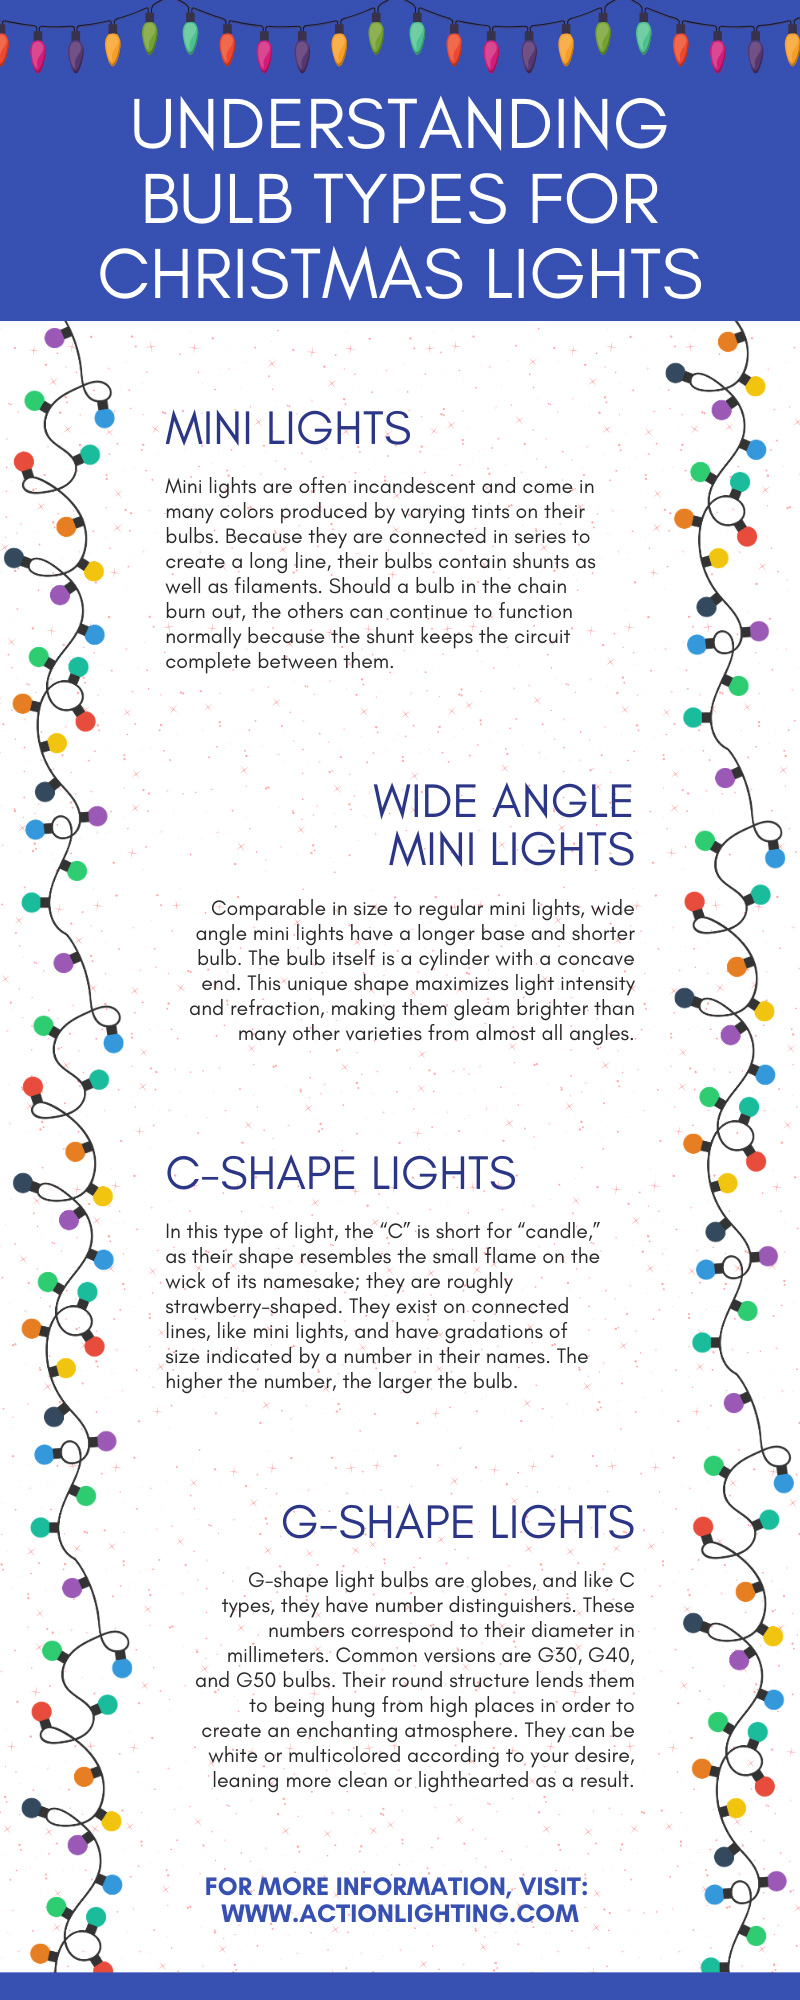 Understanding Bulb Types for Christmas Lights infographic